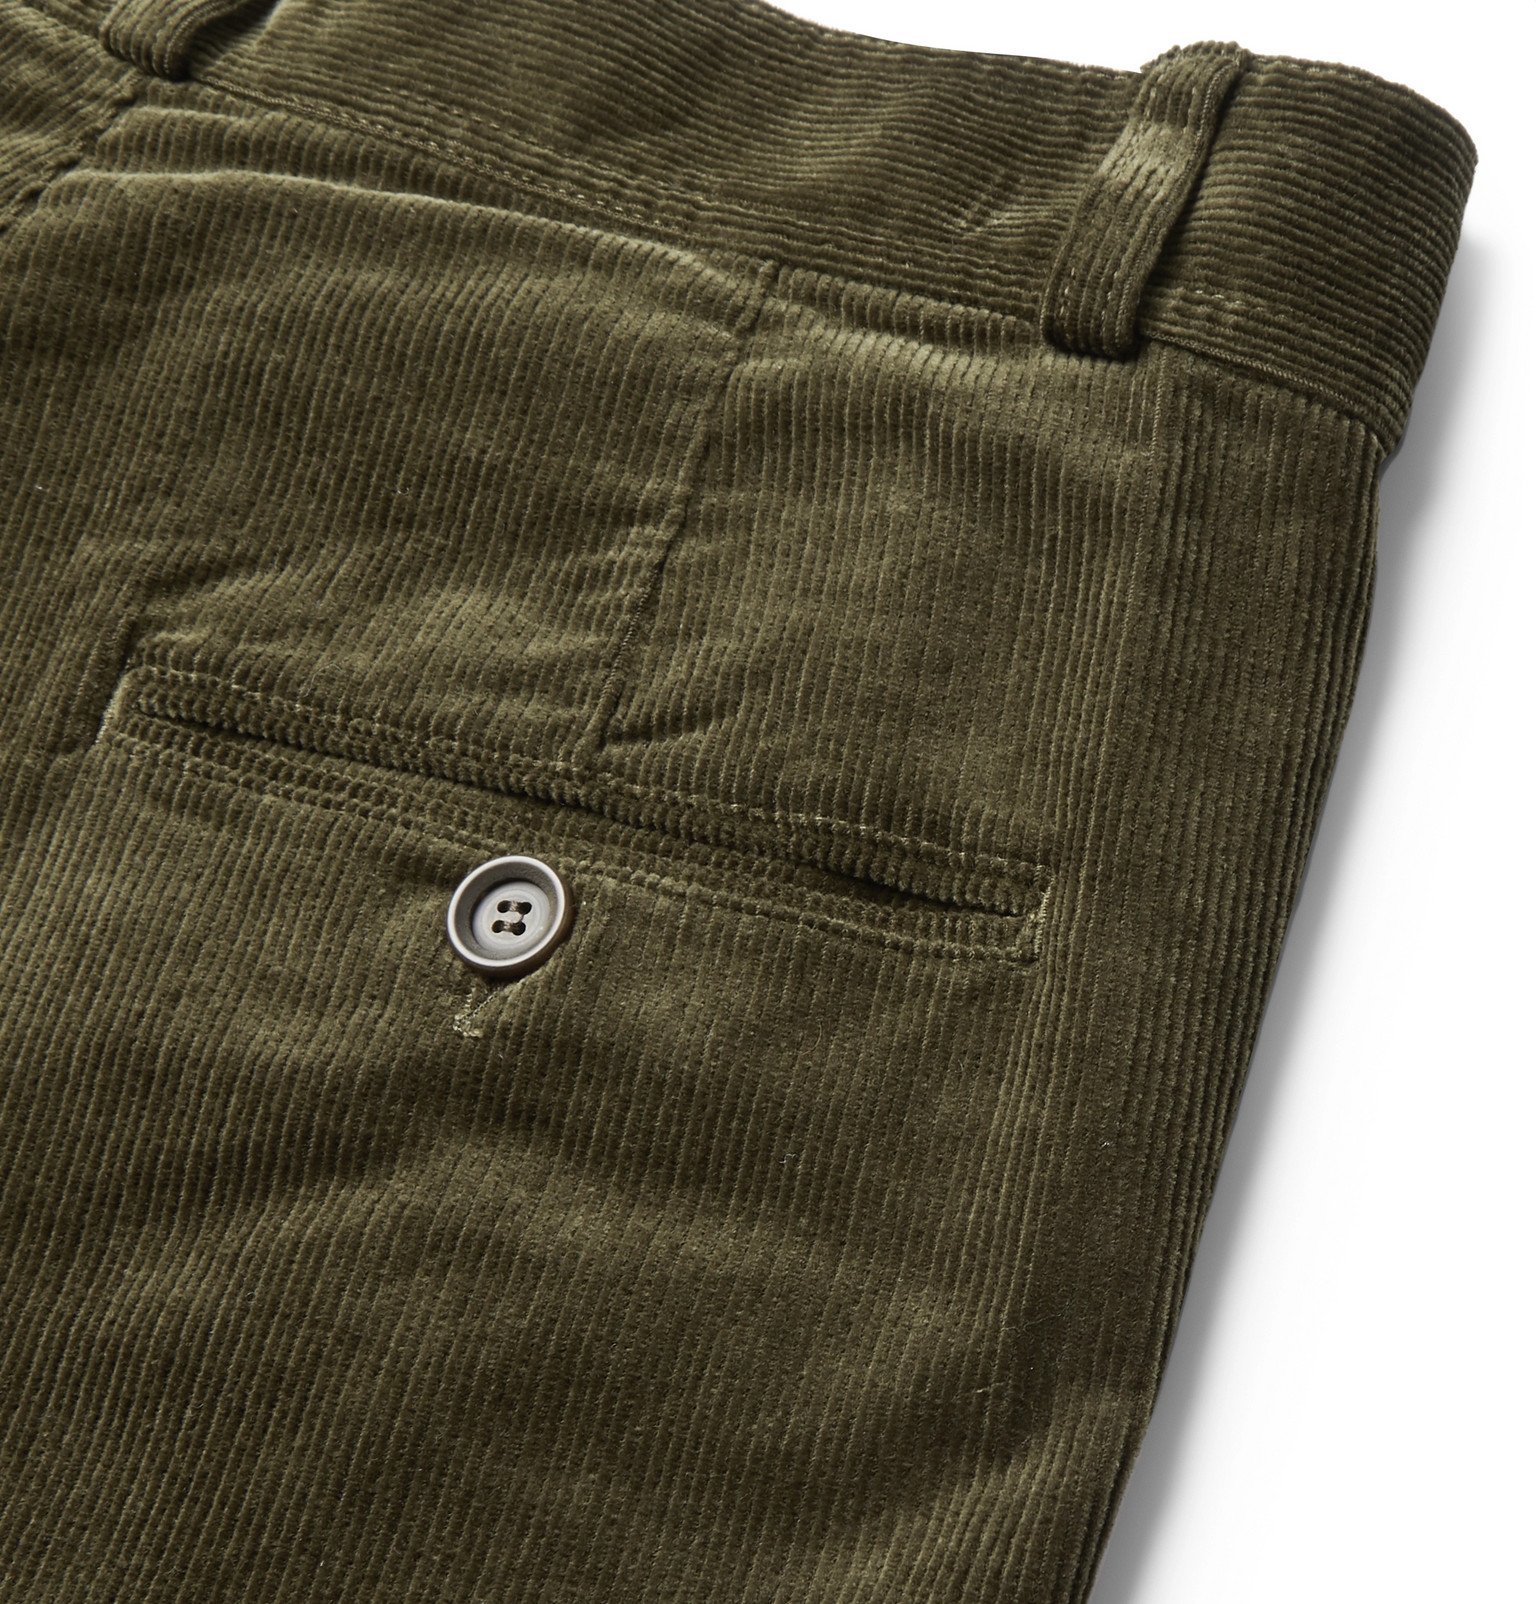 Oliver Spencer - Pleated Stretch-Cotton Corduroy Trousers - Green